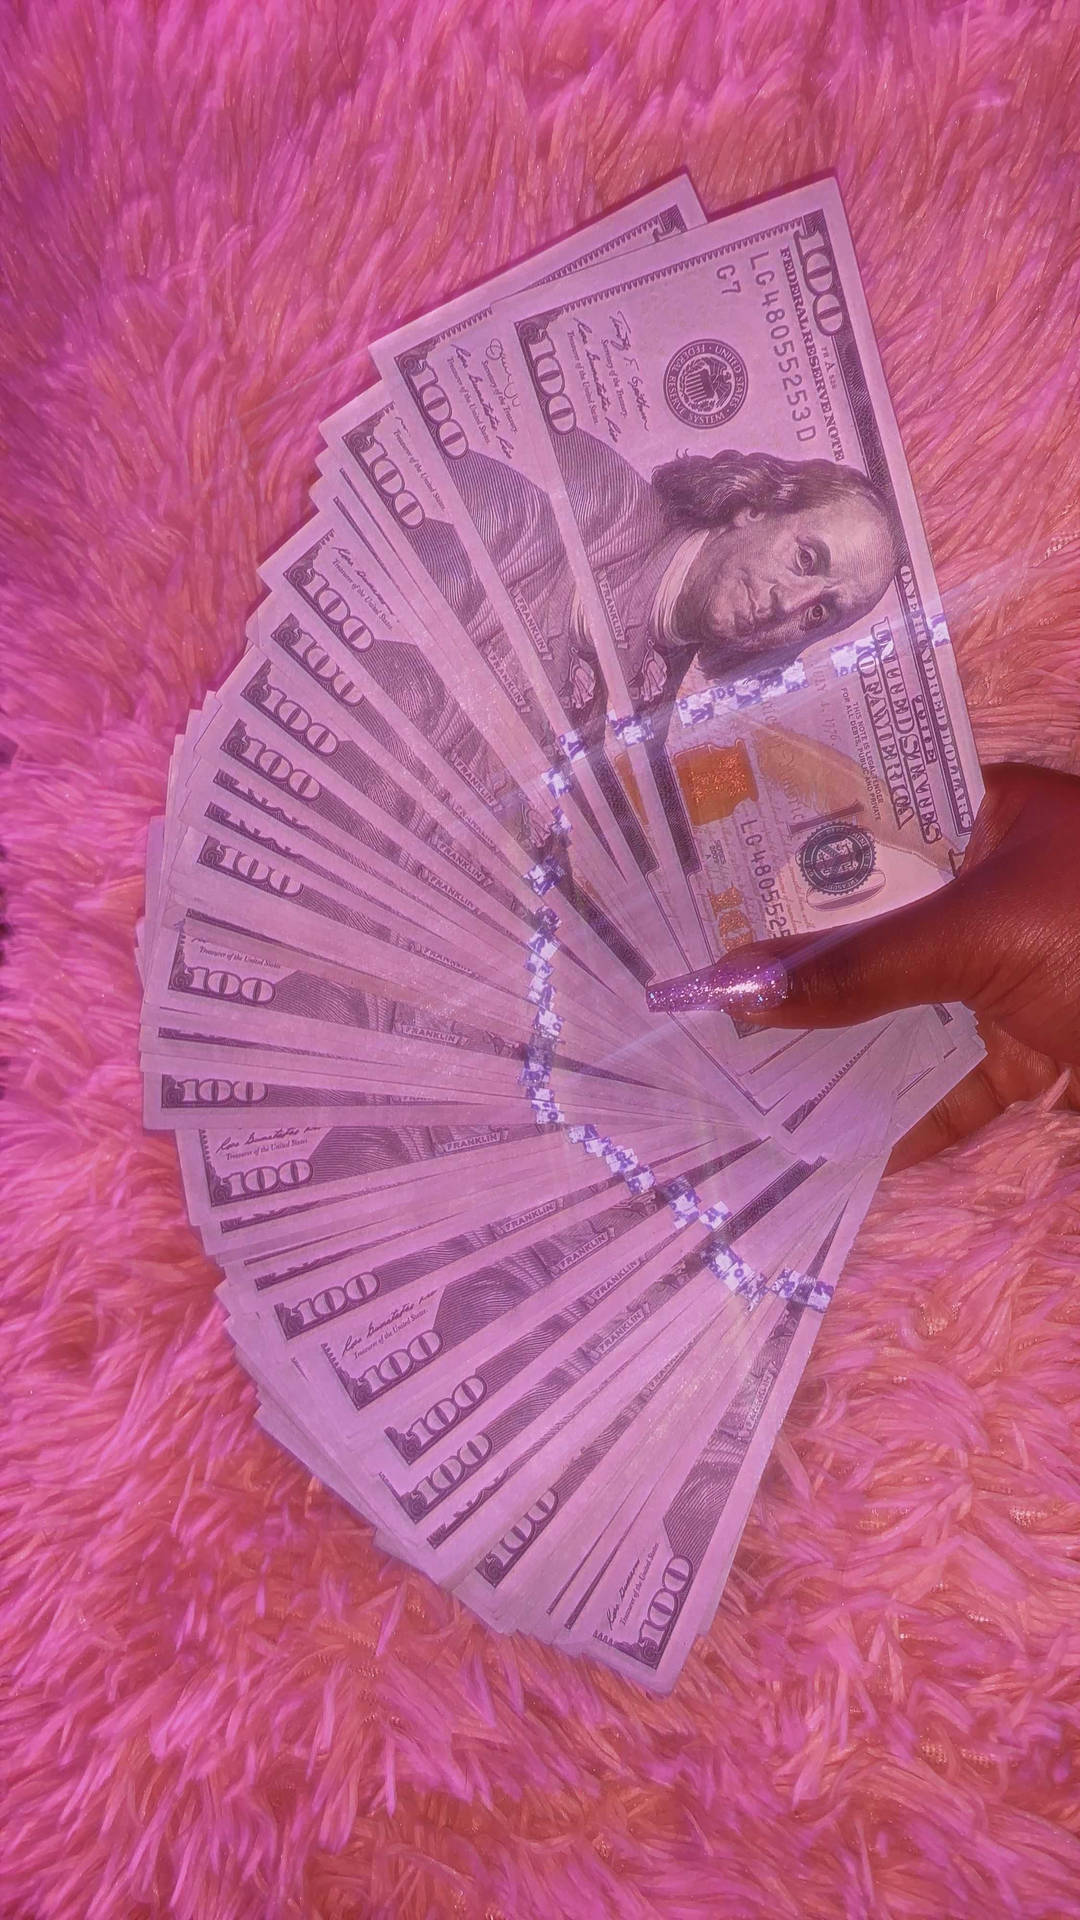 A person holding up some money on top of pink fur - Money